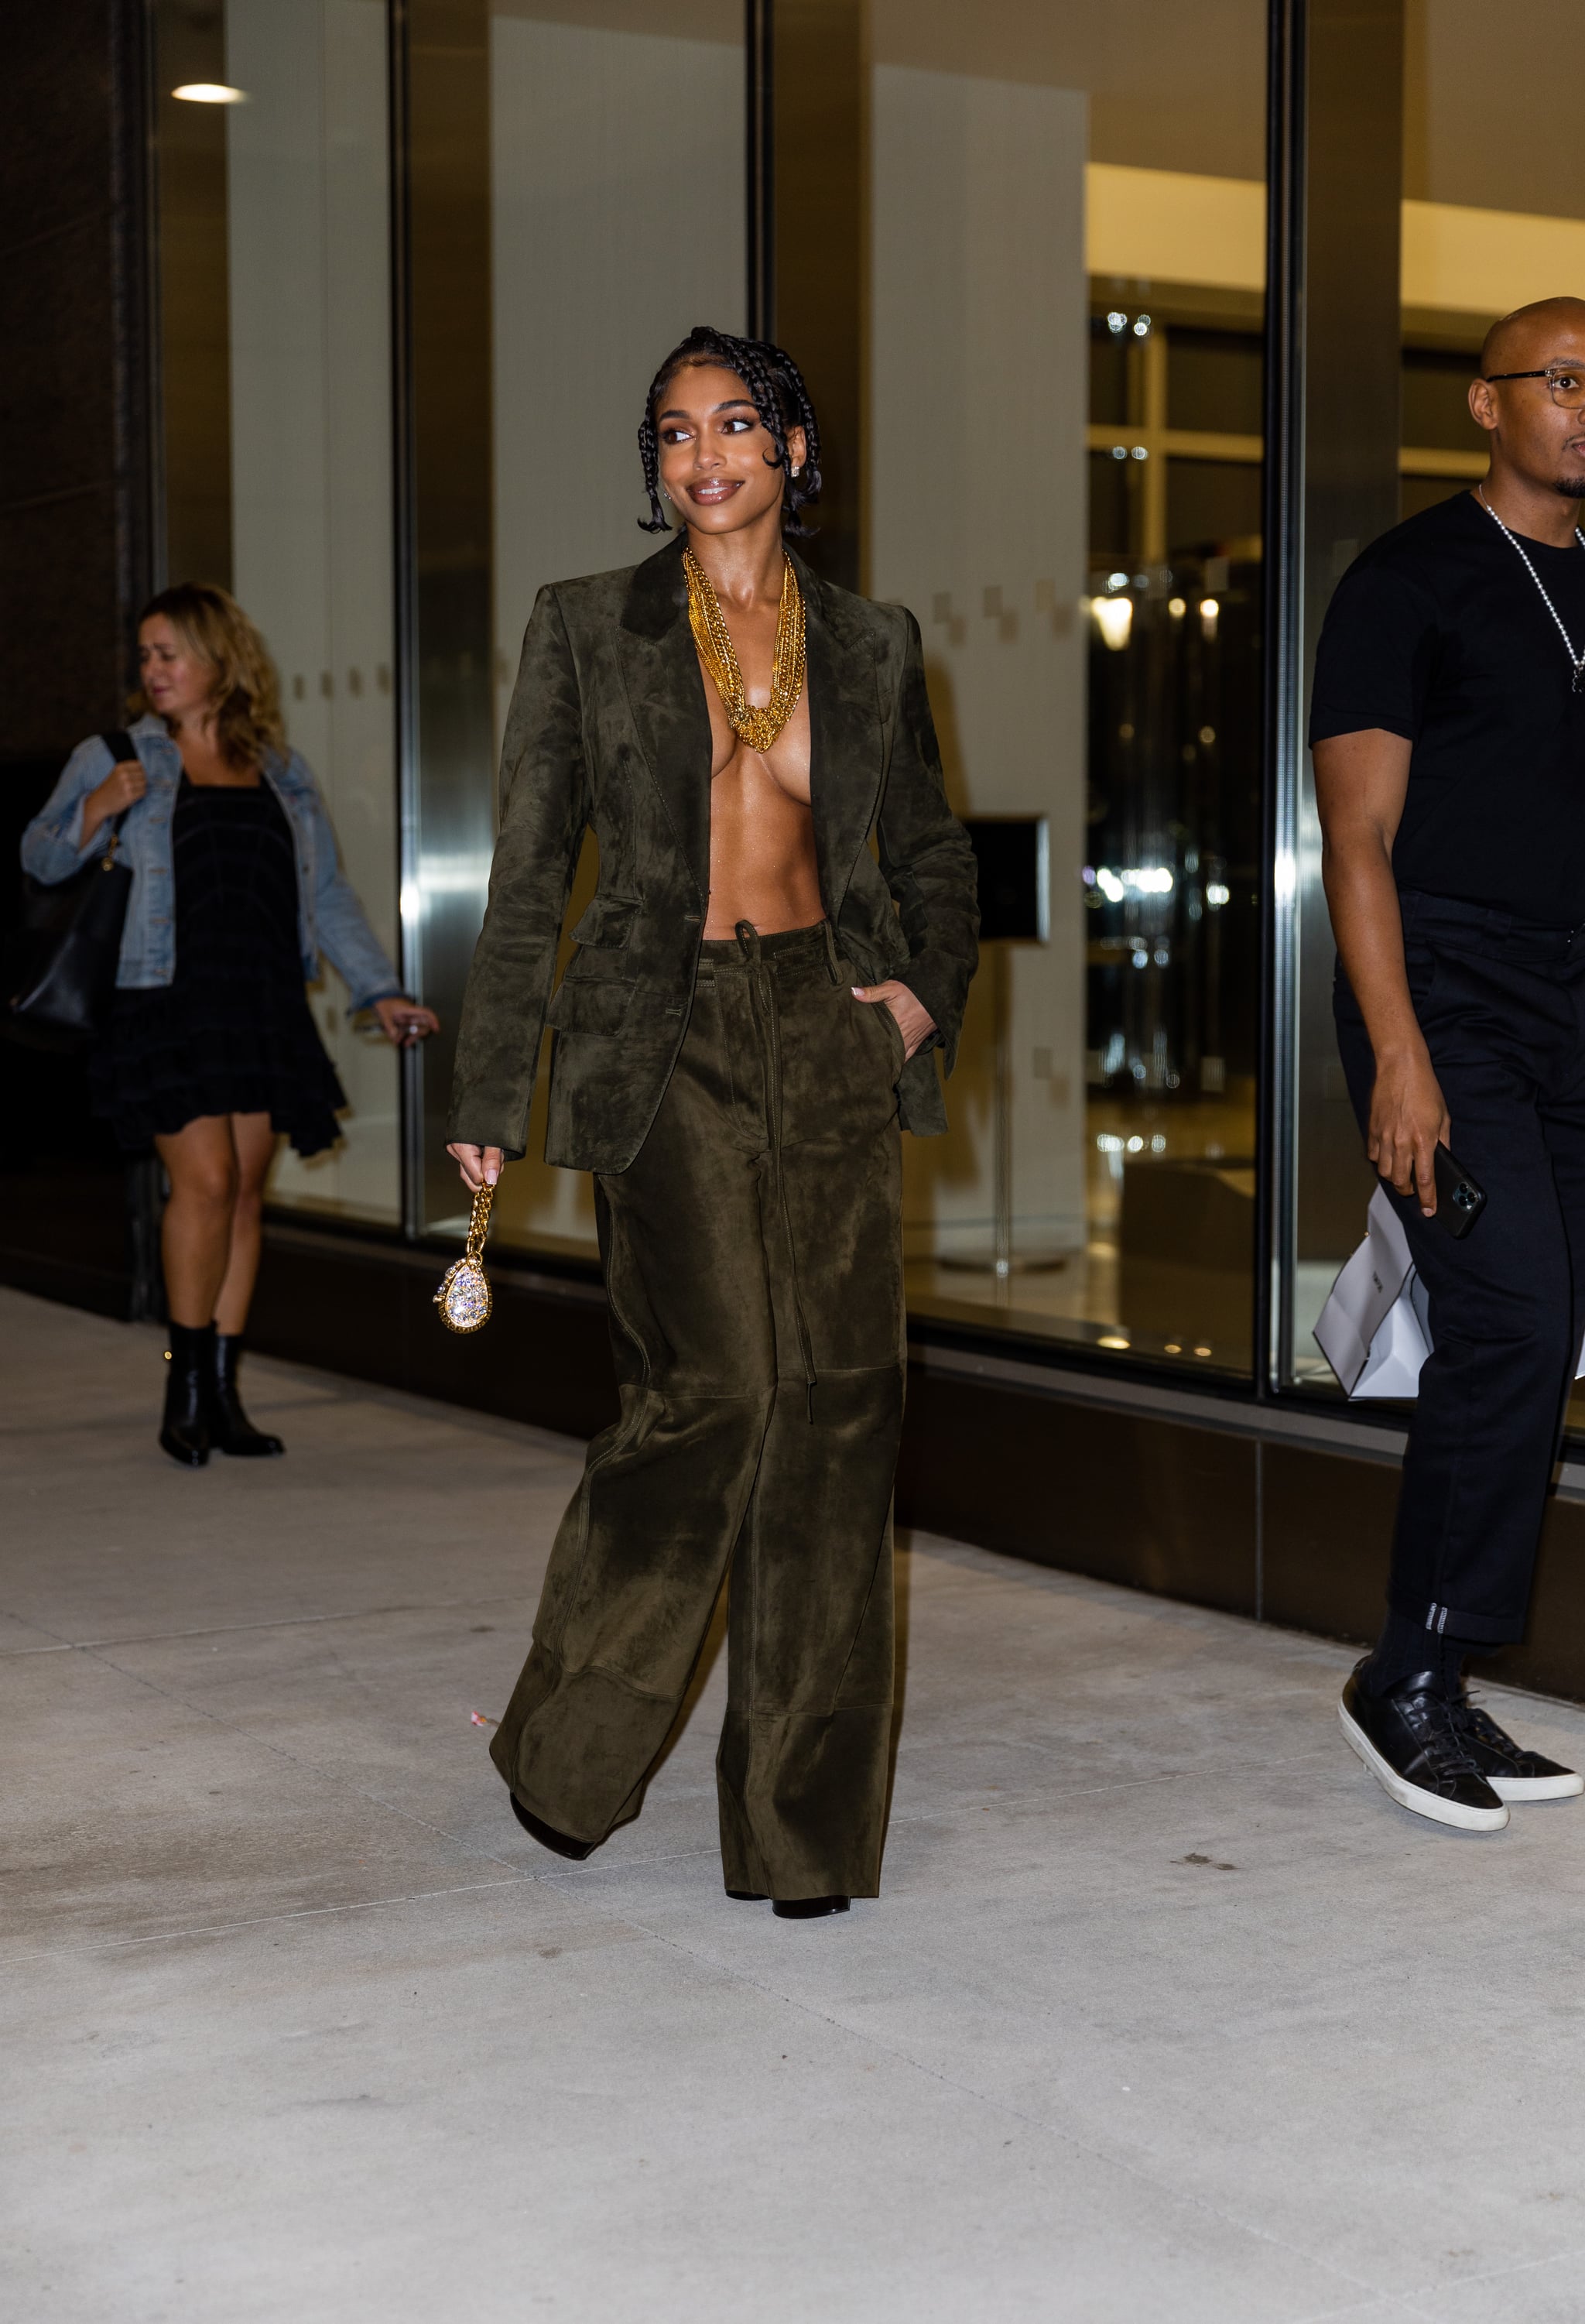 NEW YORK, NEW YORK - SEPTEMBER 14: Lori Harvey wearing khaki blazer and pants, micro bag outside Tom Ford on September 14, 2022 in New York City. (Photo by Christian Vierig/Getty Images)